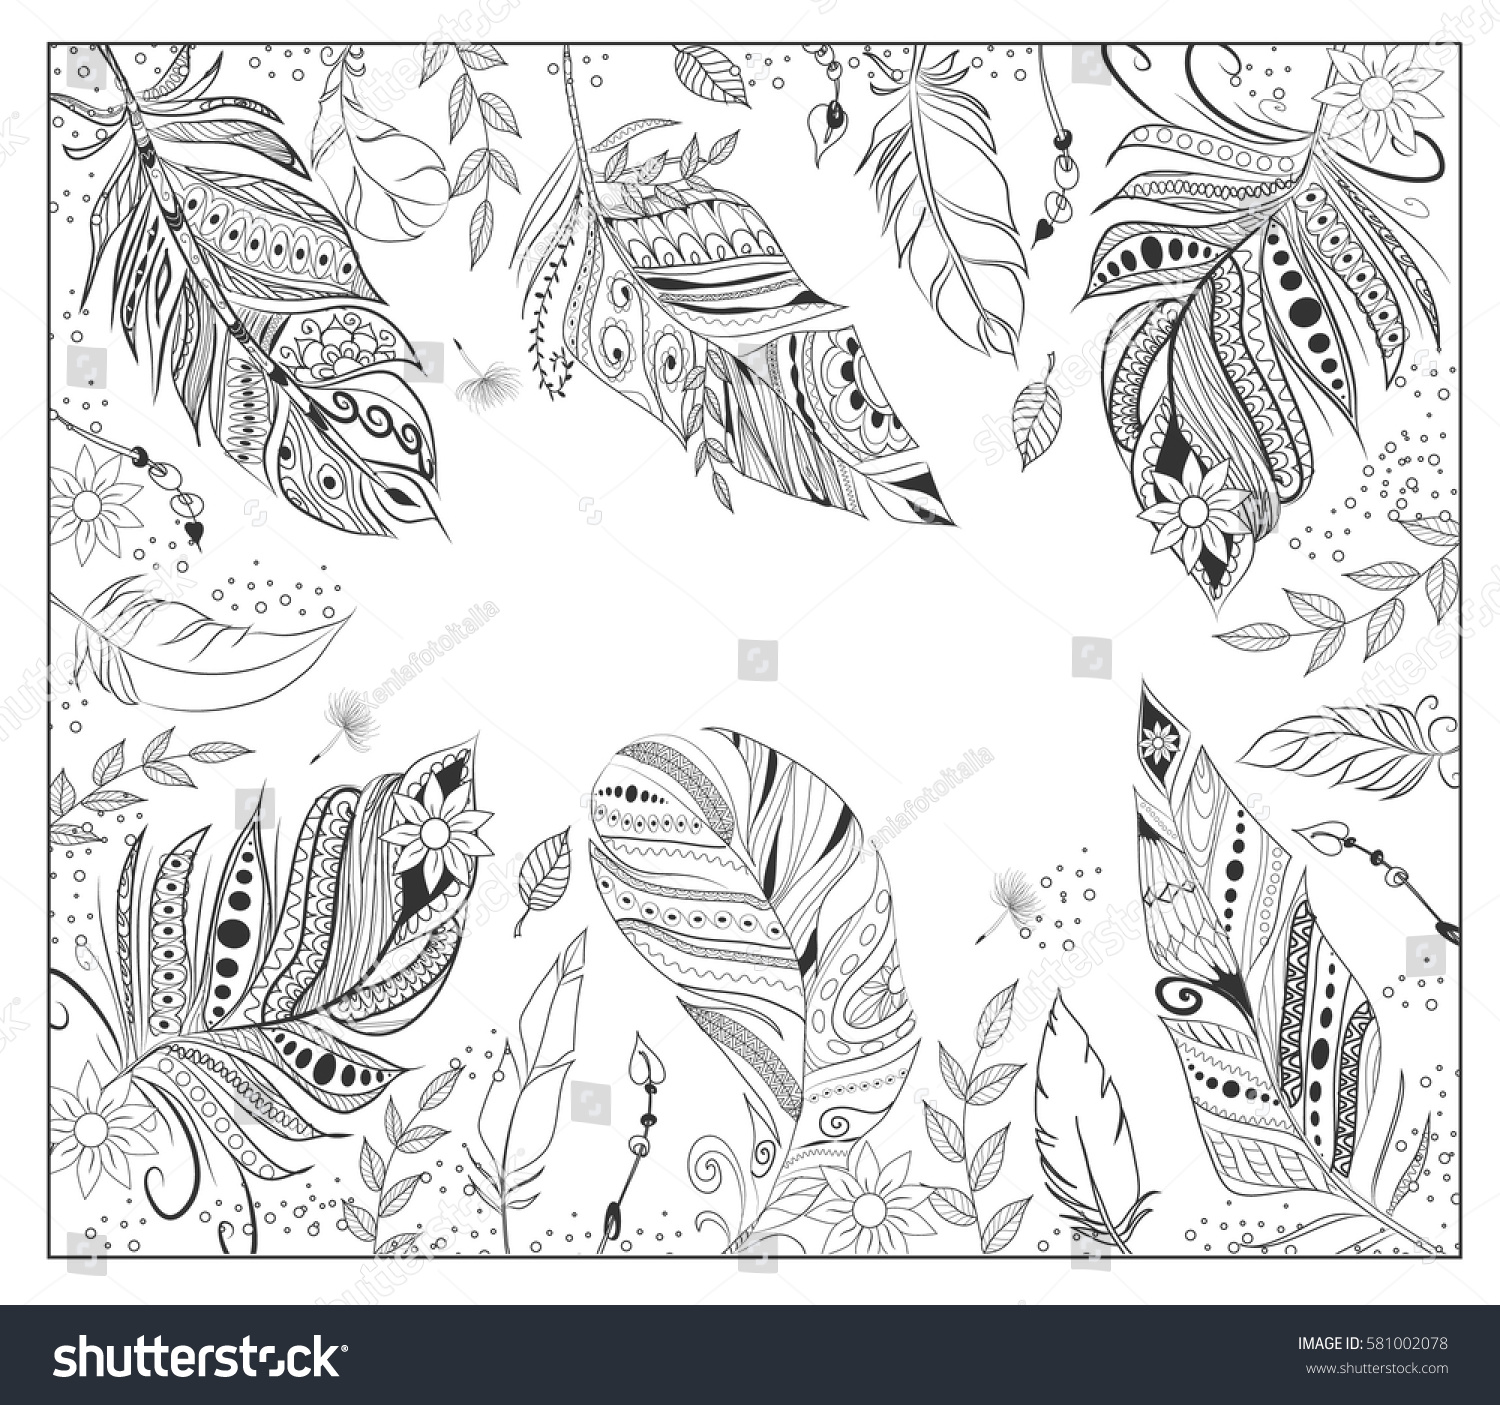 Stylized various feathers coloring page hand stock vector royalty free